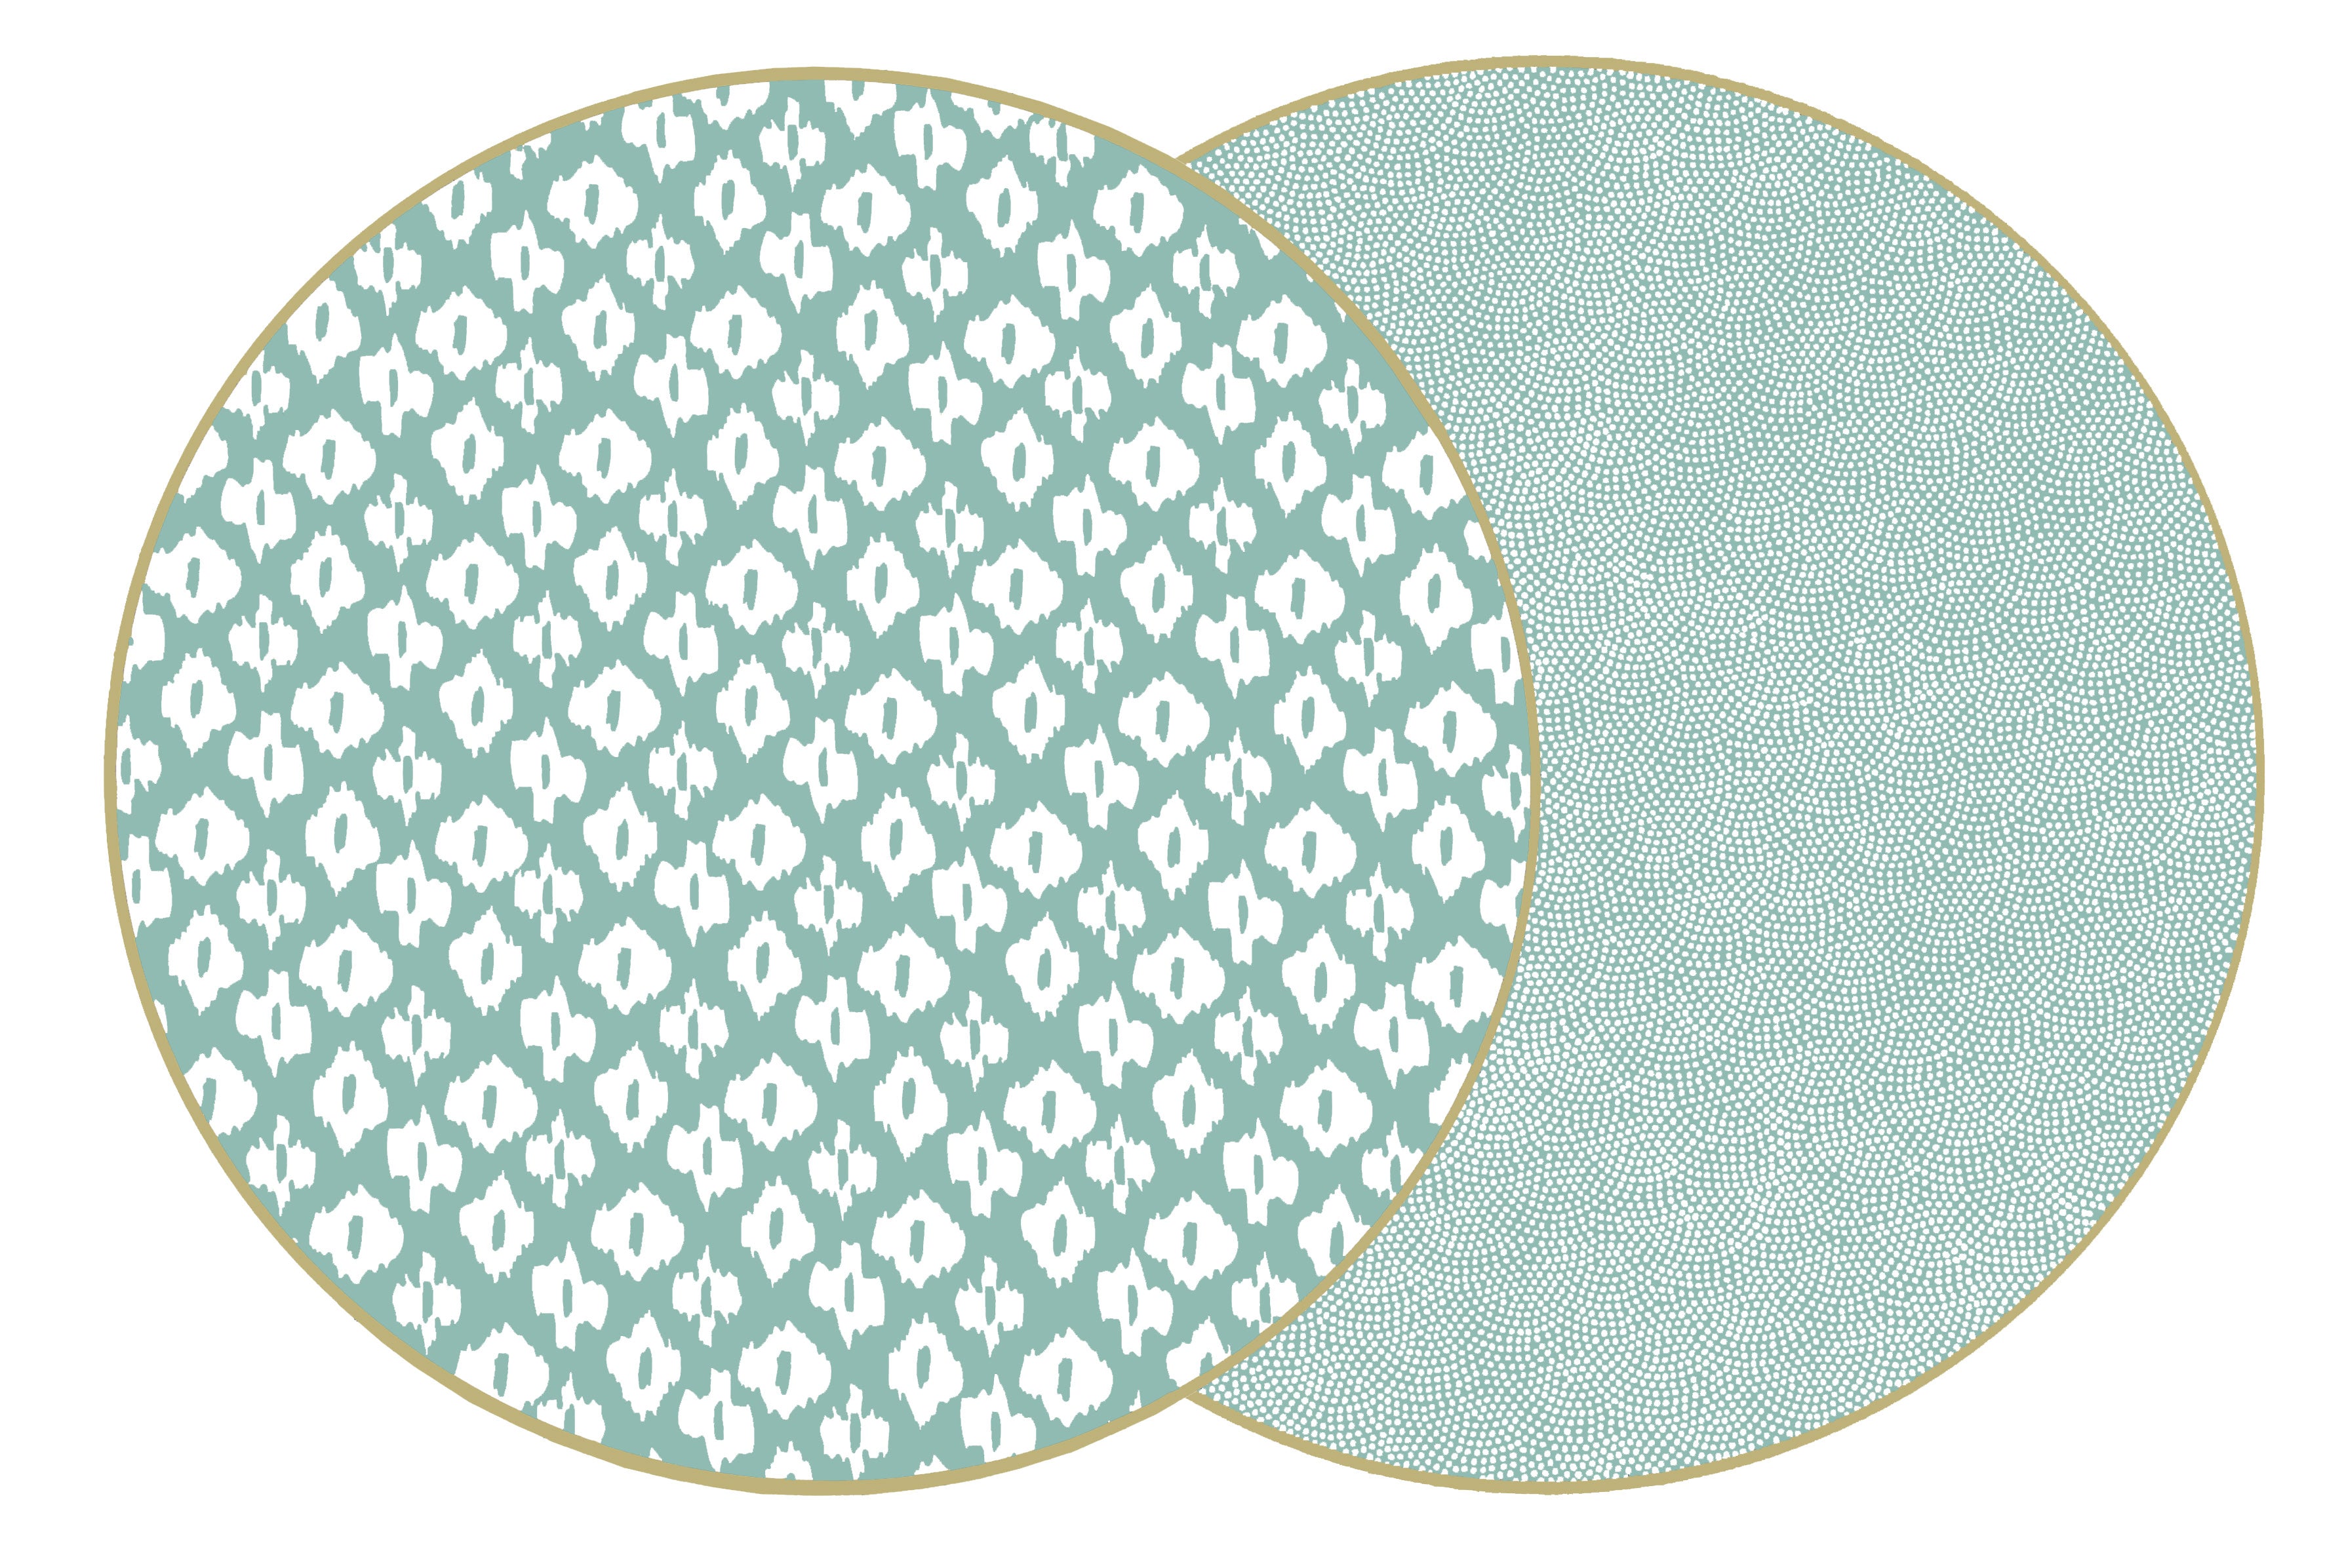 ROUND TWO SIDED IKAT PLACEMAT RETAIL